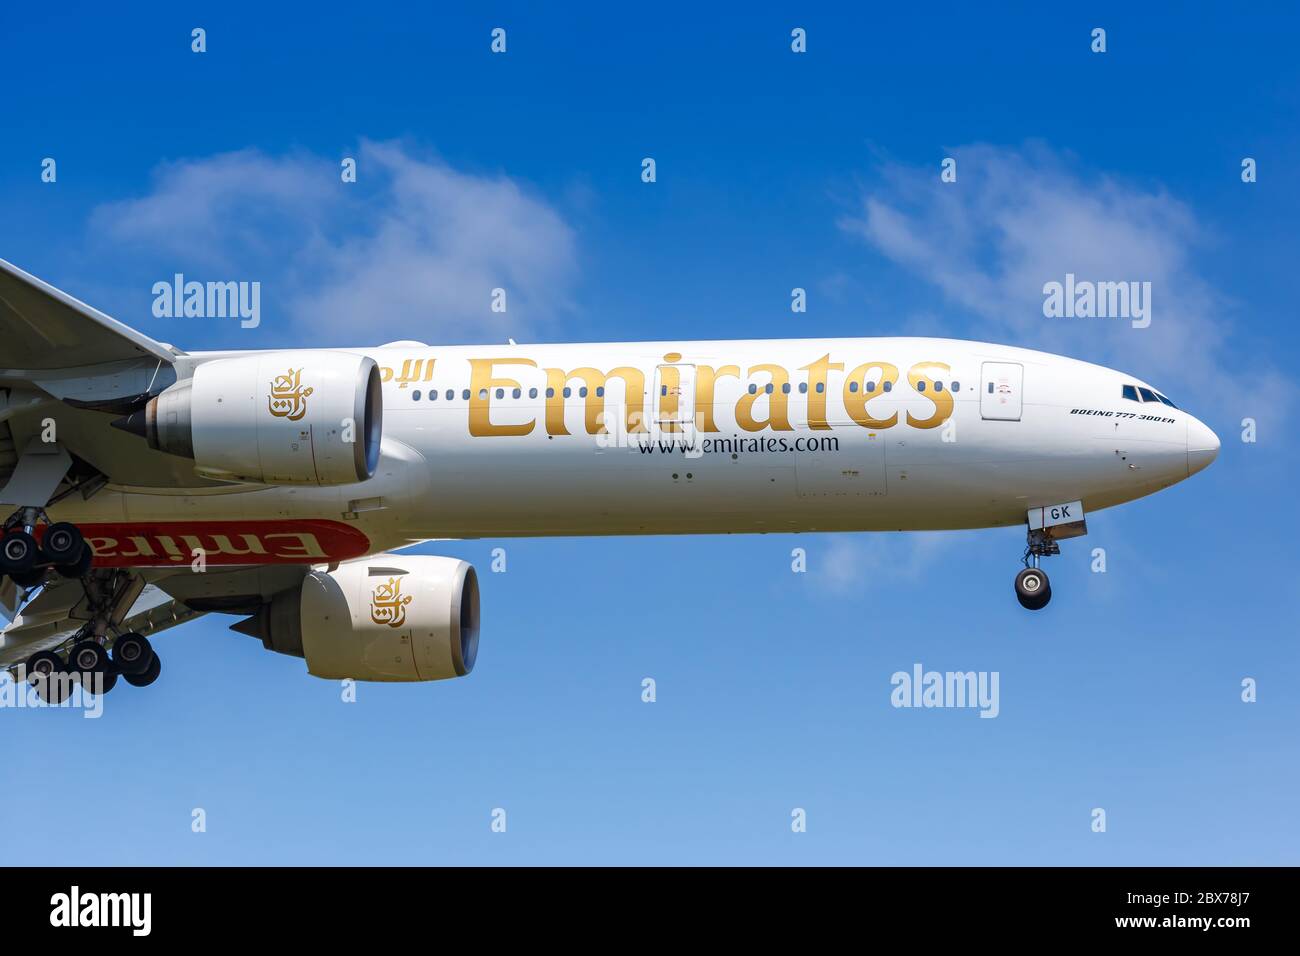 Frankfurt, Germany - May 27, 2020: Emirates Boeing 777-300ER airplane at Frankfurt airport (FRA) in Germany. Boeing is an American aircraft manufactur Stock Photo